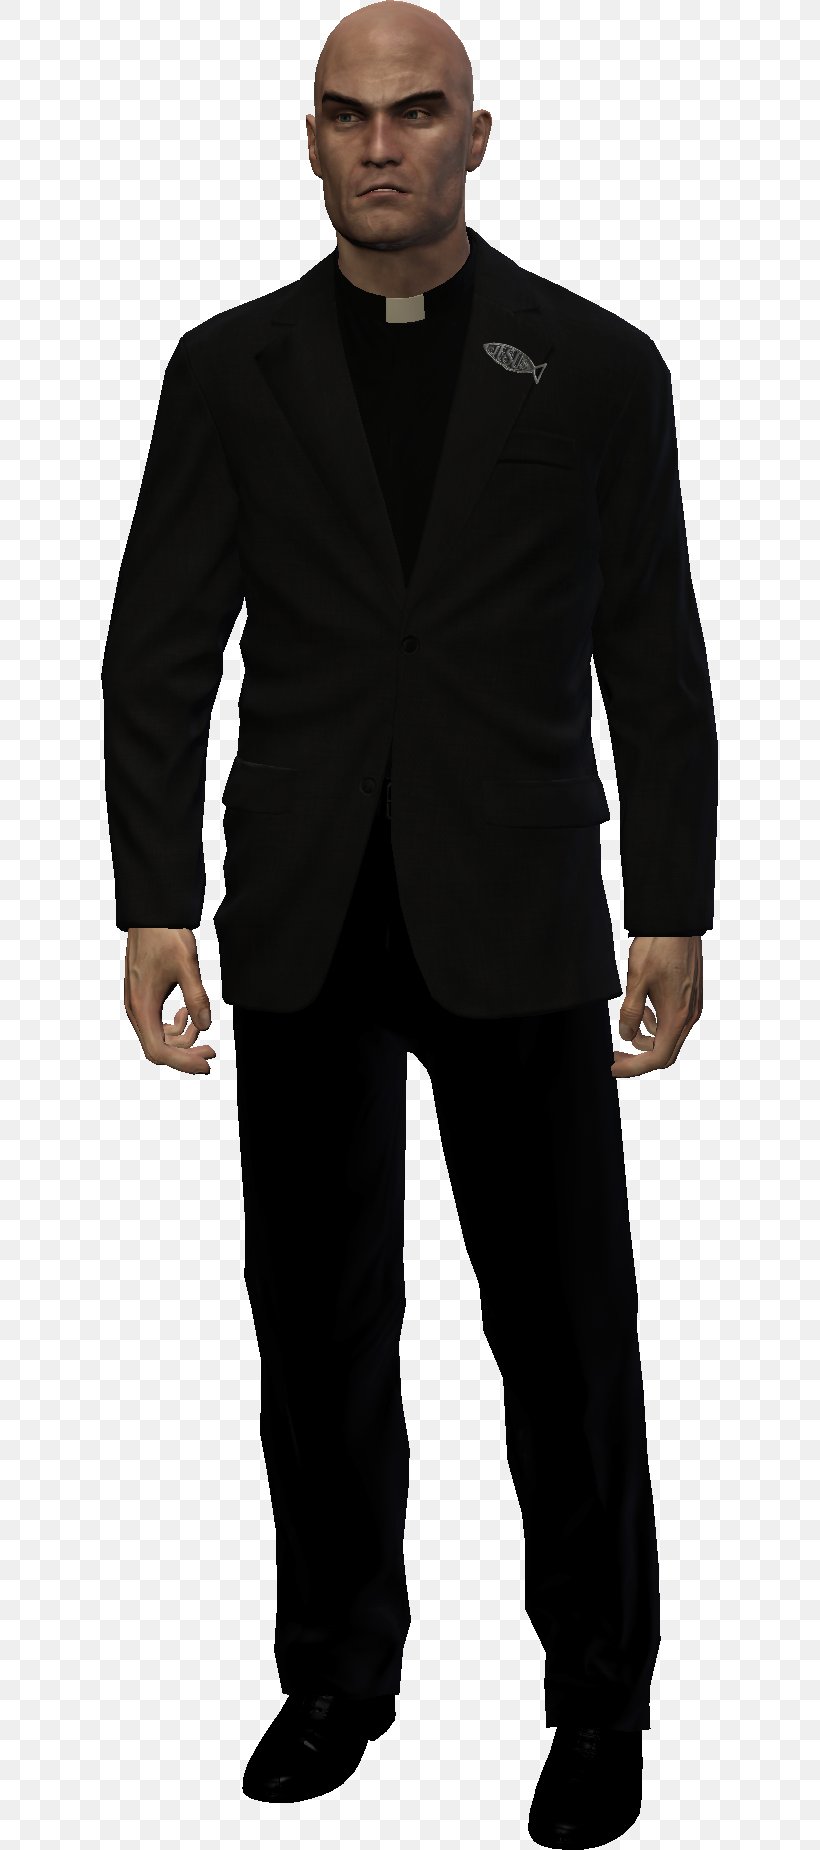 Hitman Agent 47 Suit Robe Png 617x1850px Hitman Agent 47 Blazer Businessperson Clothing Download Free